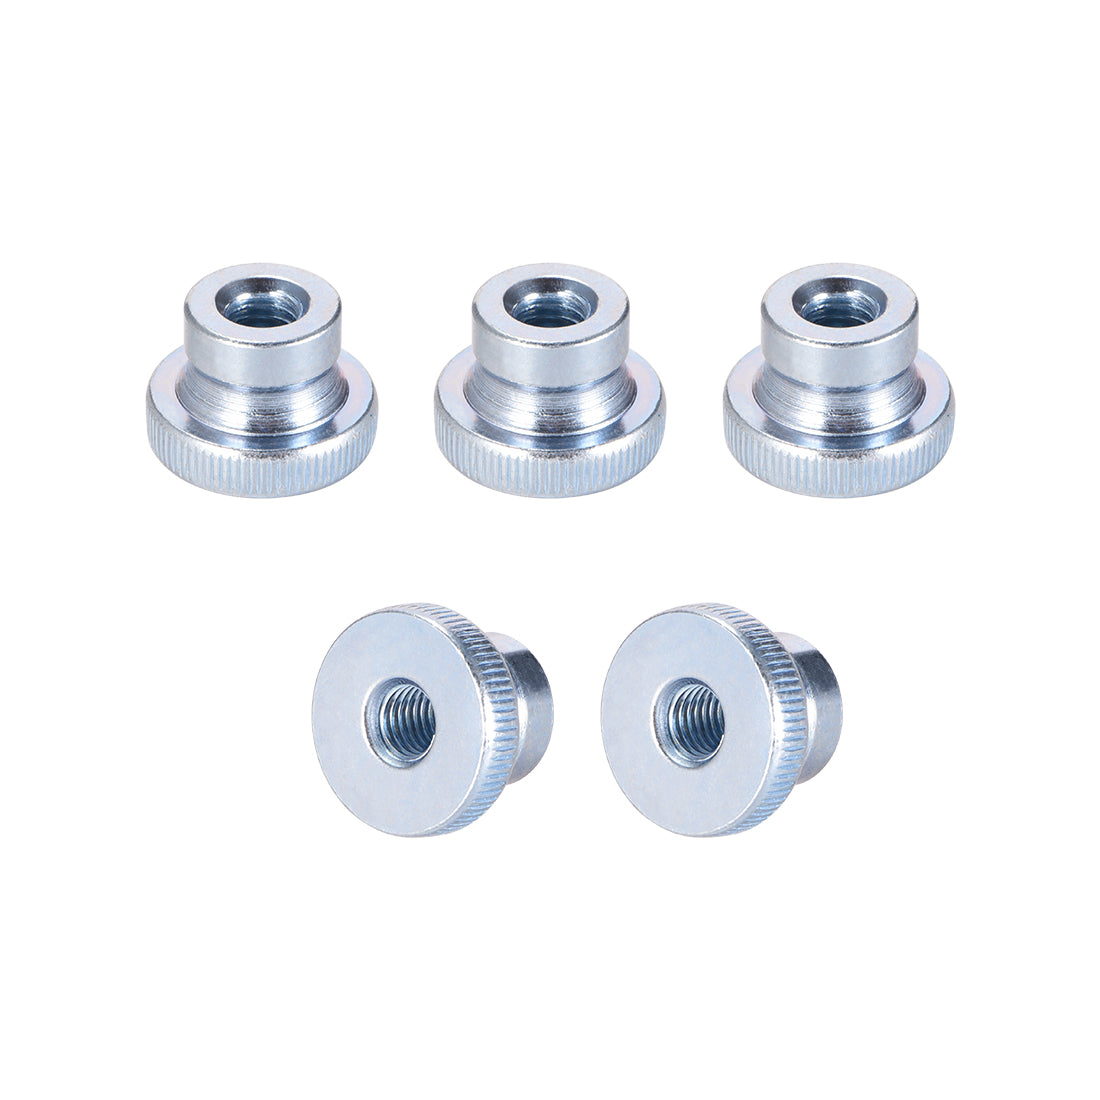 Uxcell Uxcell Knurled Thumb Nuts, 5Pcs M10 Iron Round Knobs for 3D Printer Parts